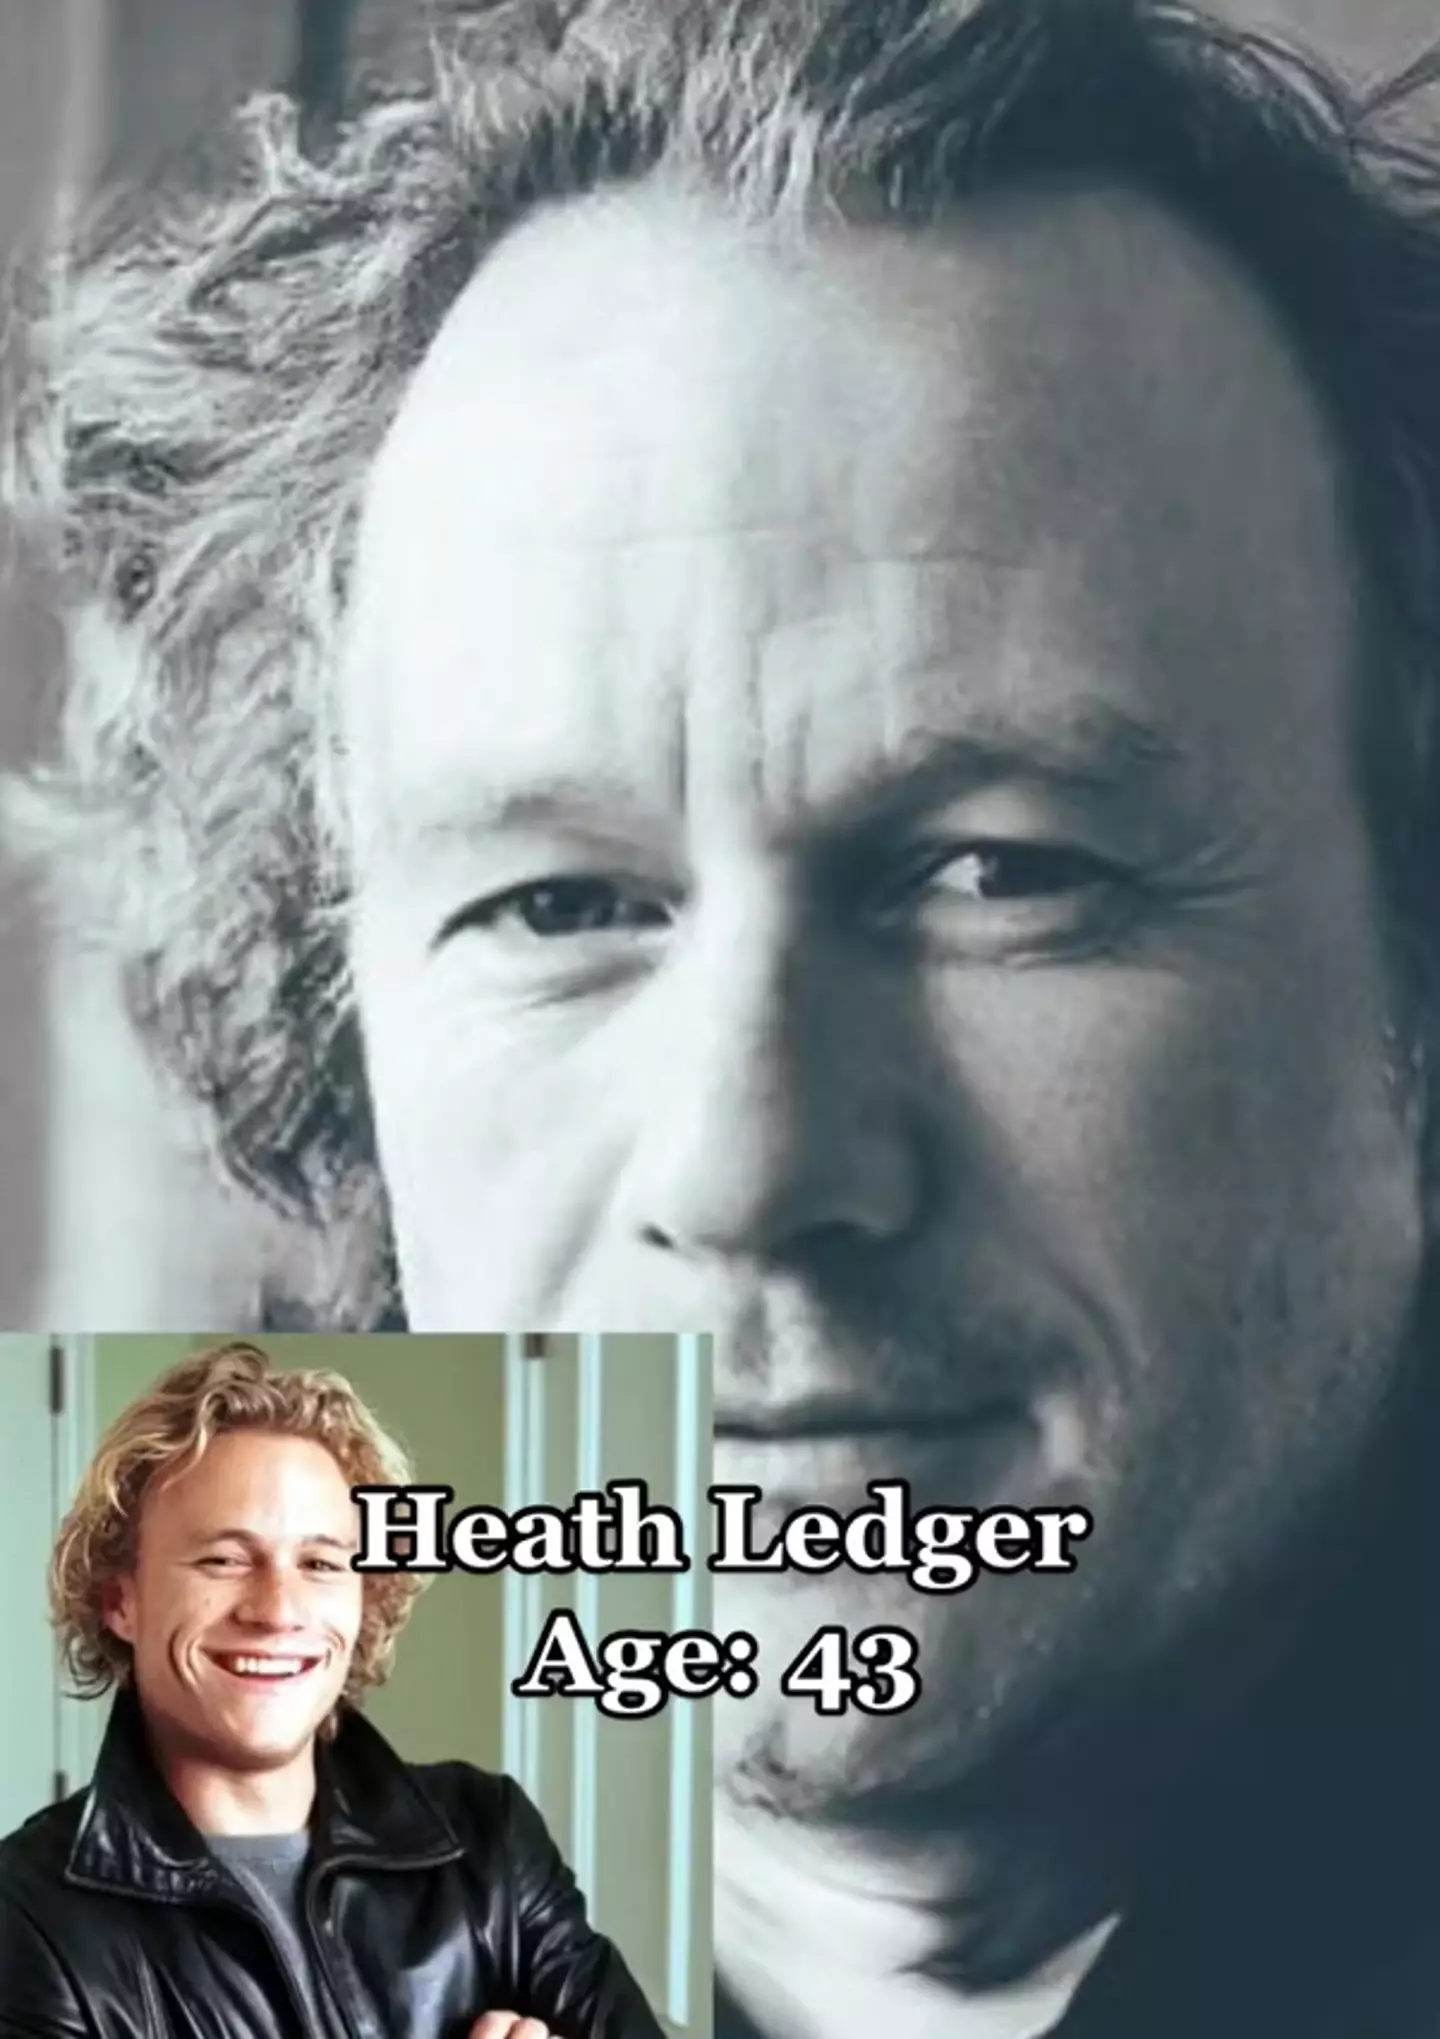 A few wrinkles and a slightly receding hairline aside, Heath Ledger would still have been a heartthrob.